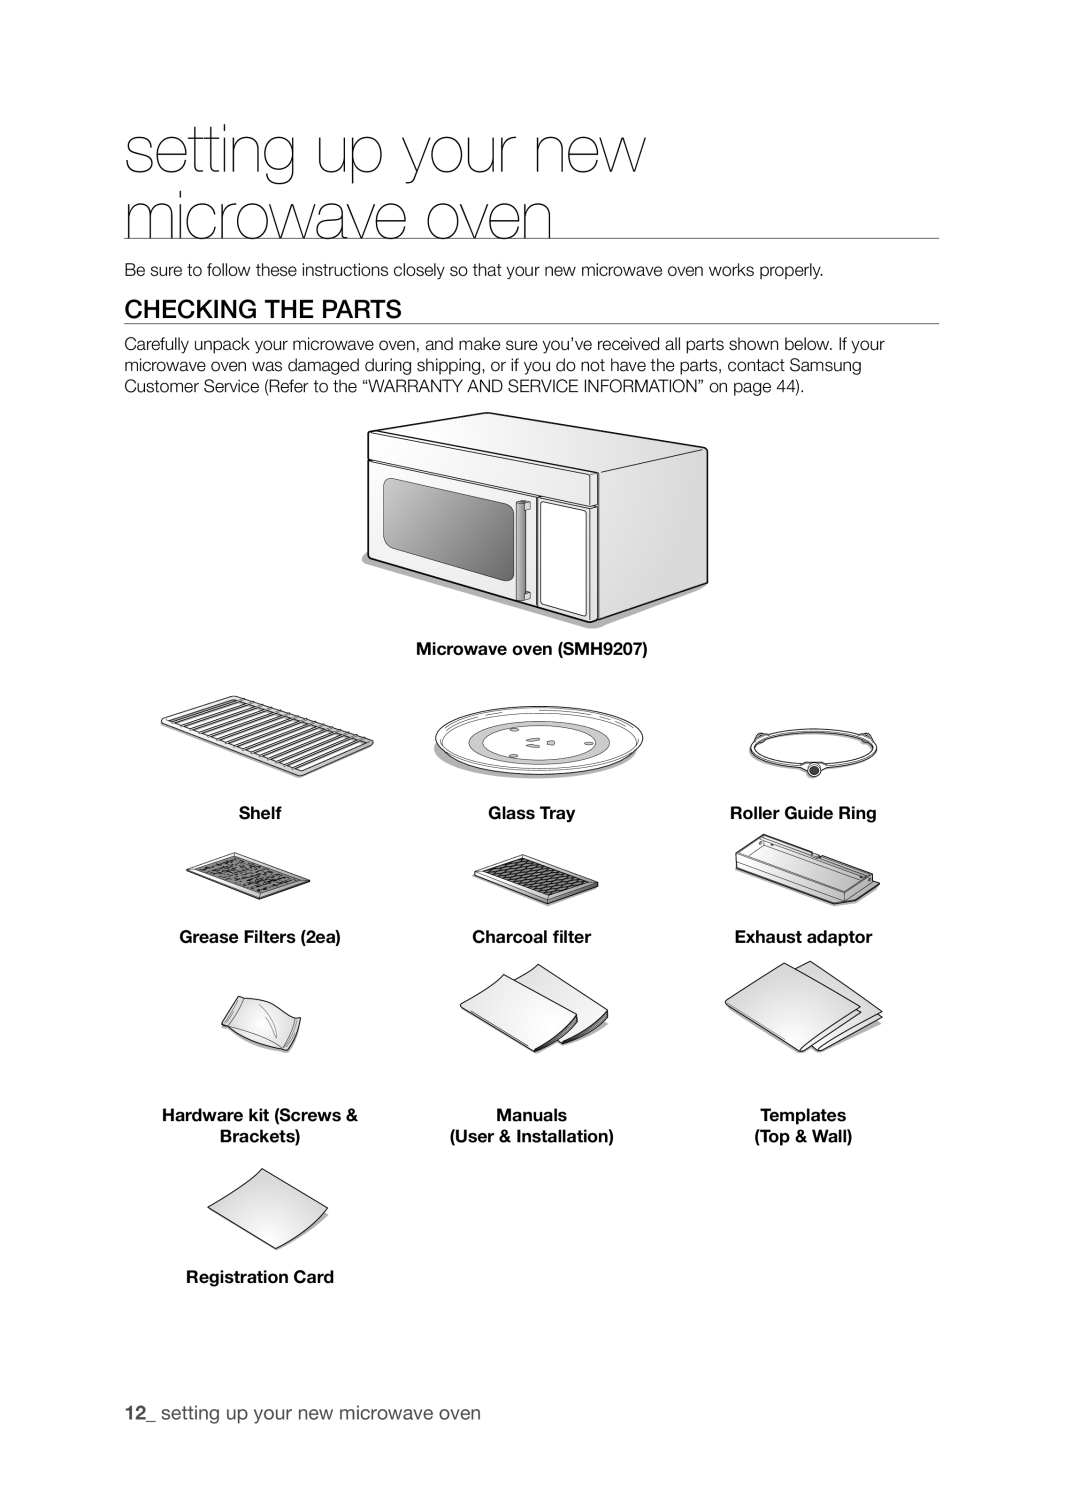 Samsung SMH9207 user manual setting up your new microwave oven, Checking the parts 